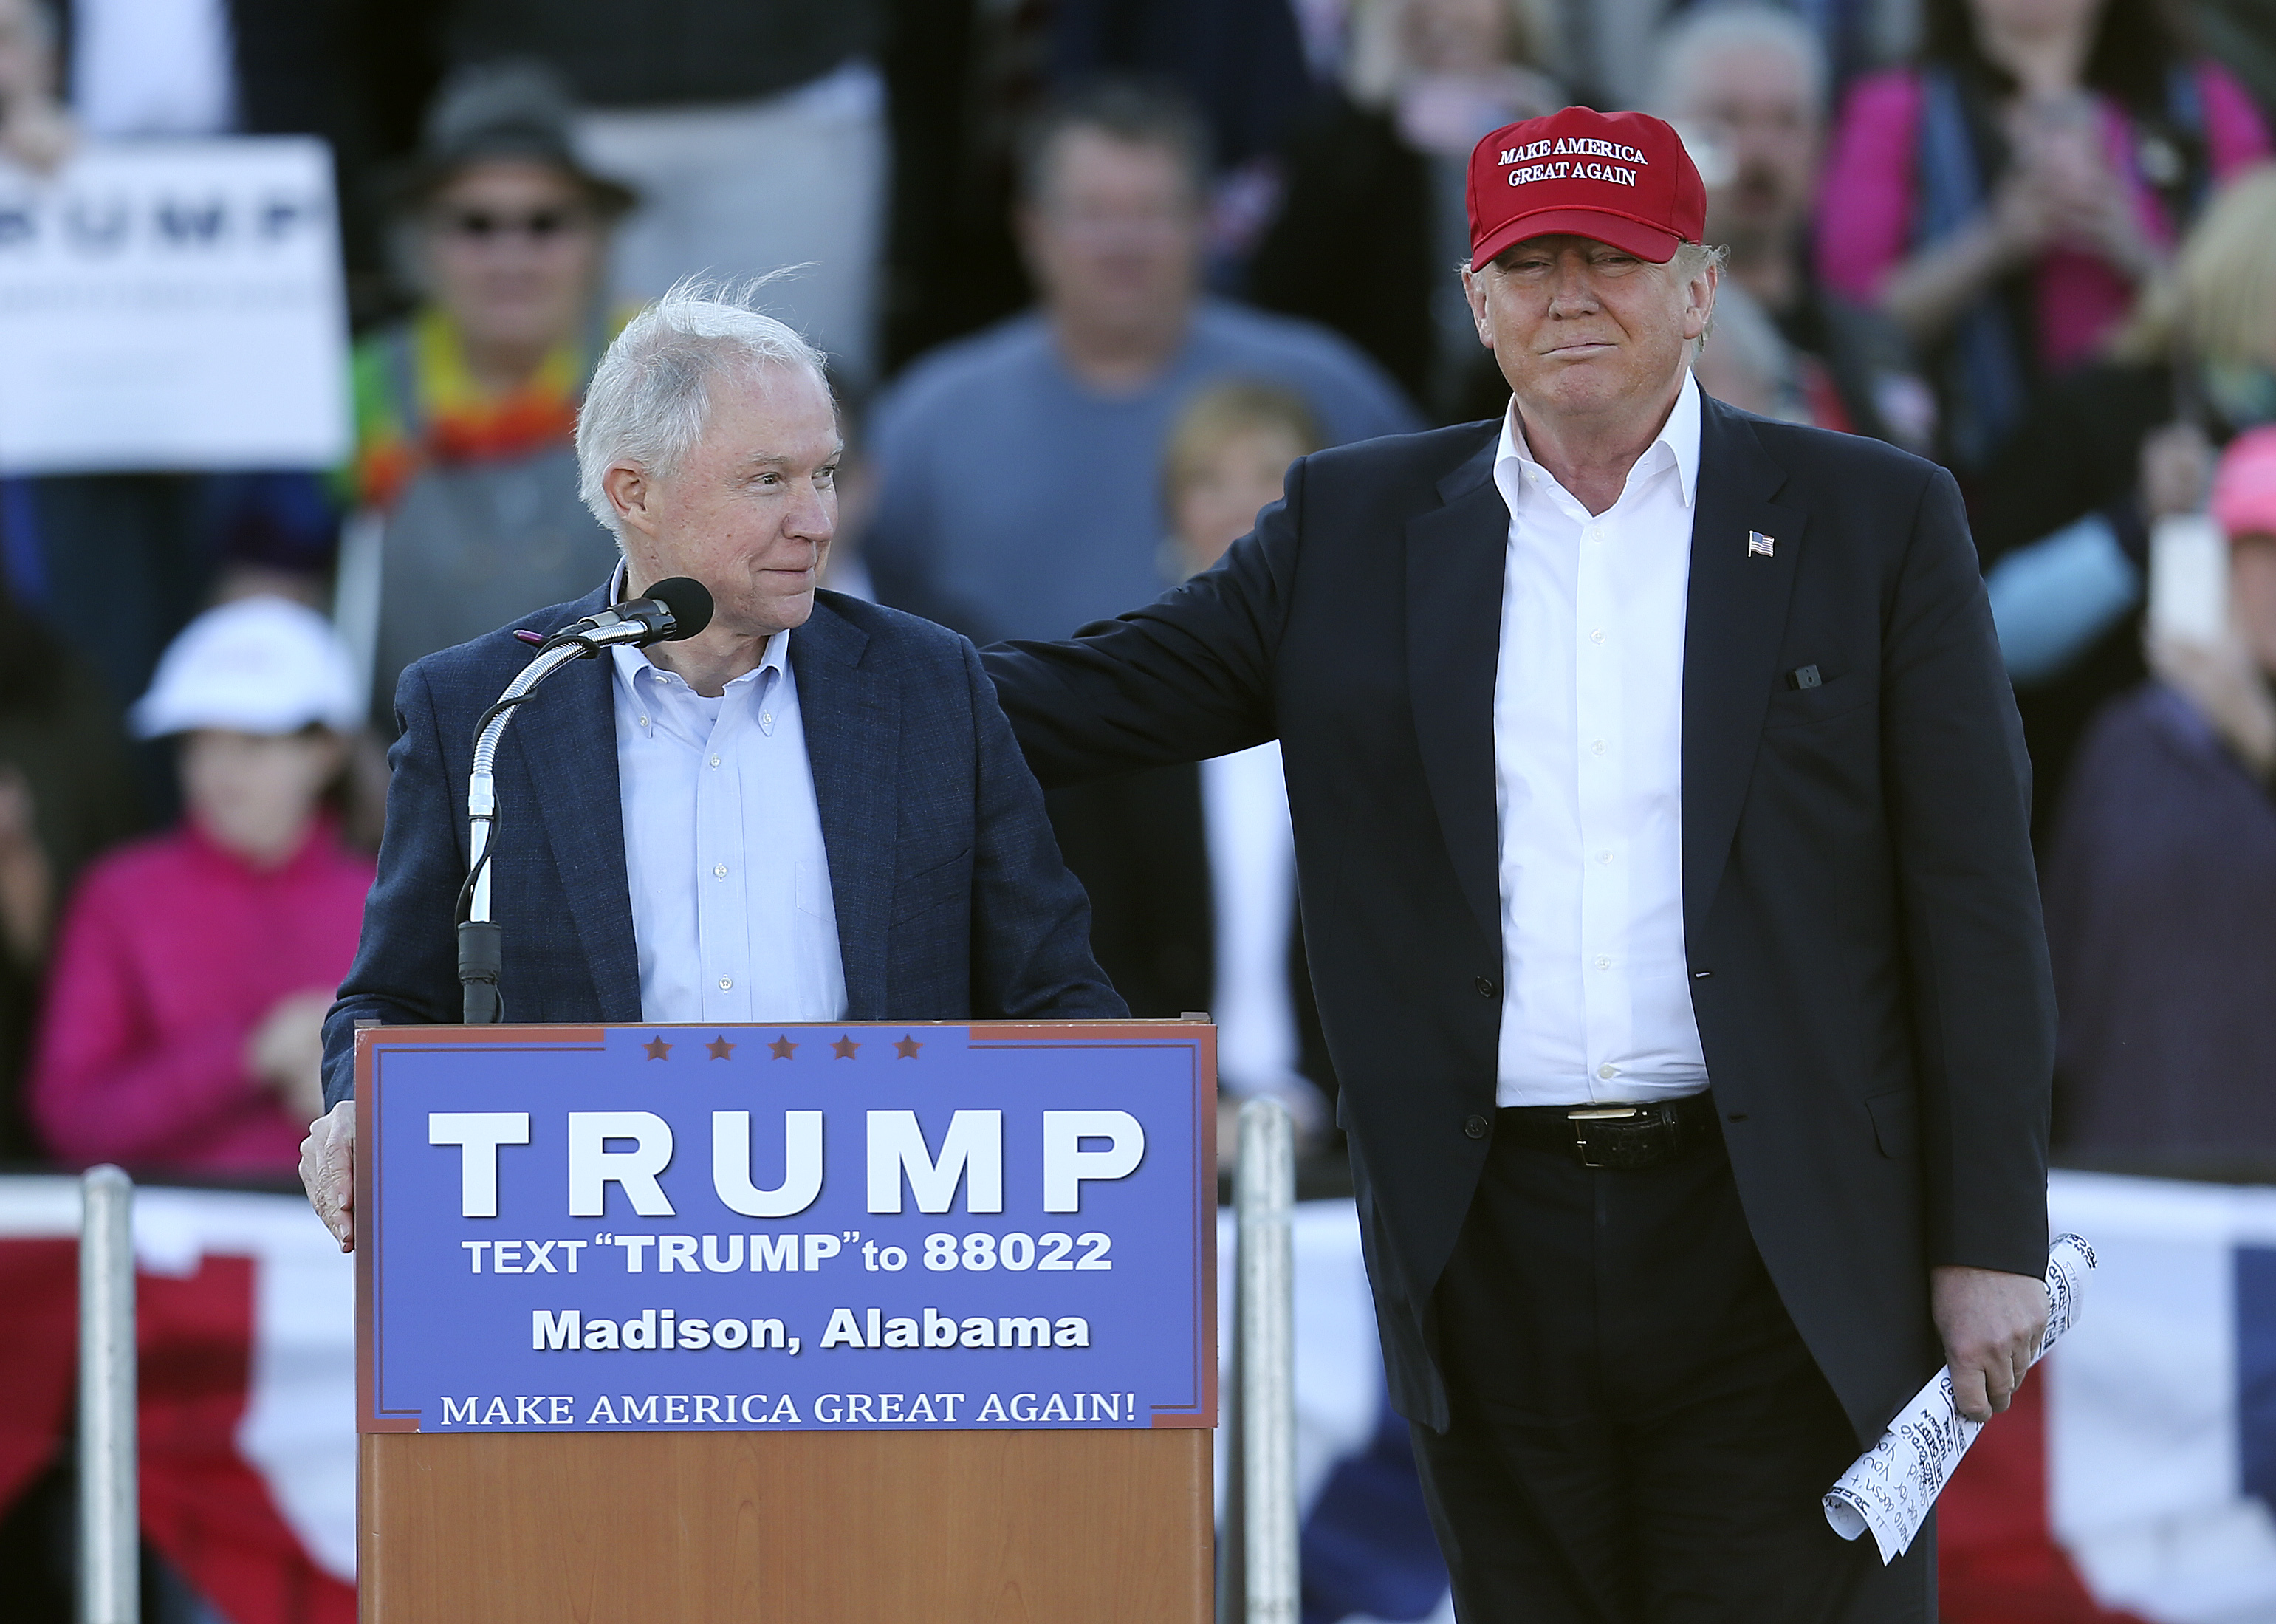 Republican presidential candidate Donald Trump, right, stands next to Sen. Jeff Sessions, R-Ala., as Sessions speaks  during a rally Sunday, Feb. 28, 2016, in Madison, Ala. (John Bazemore—AP)